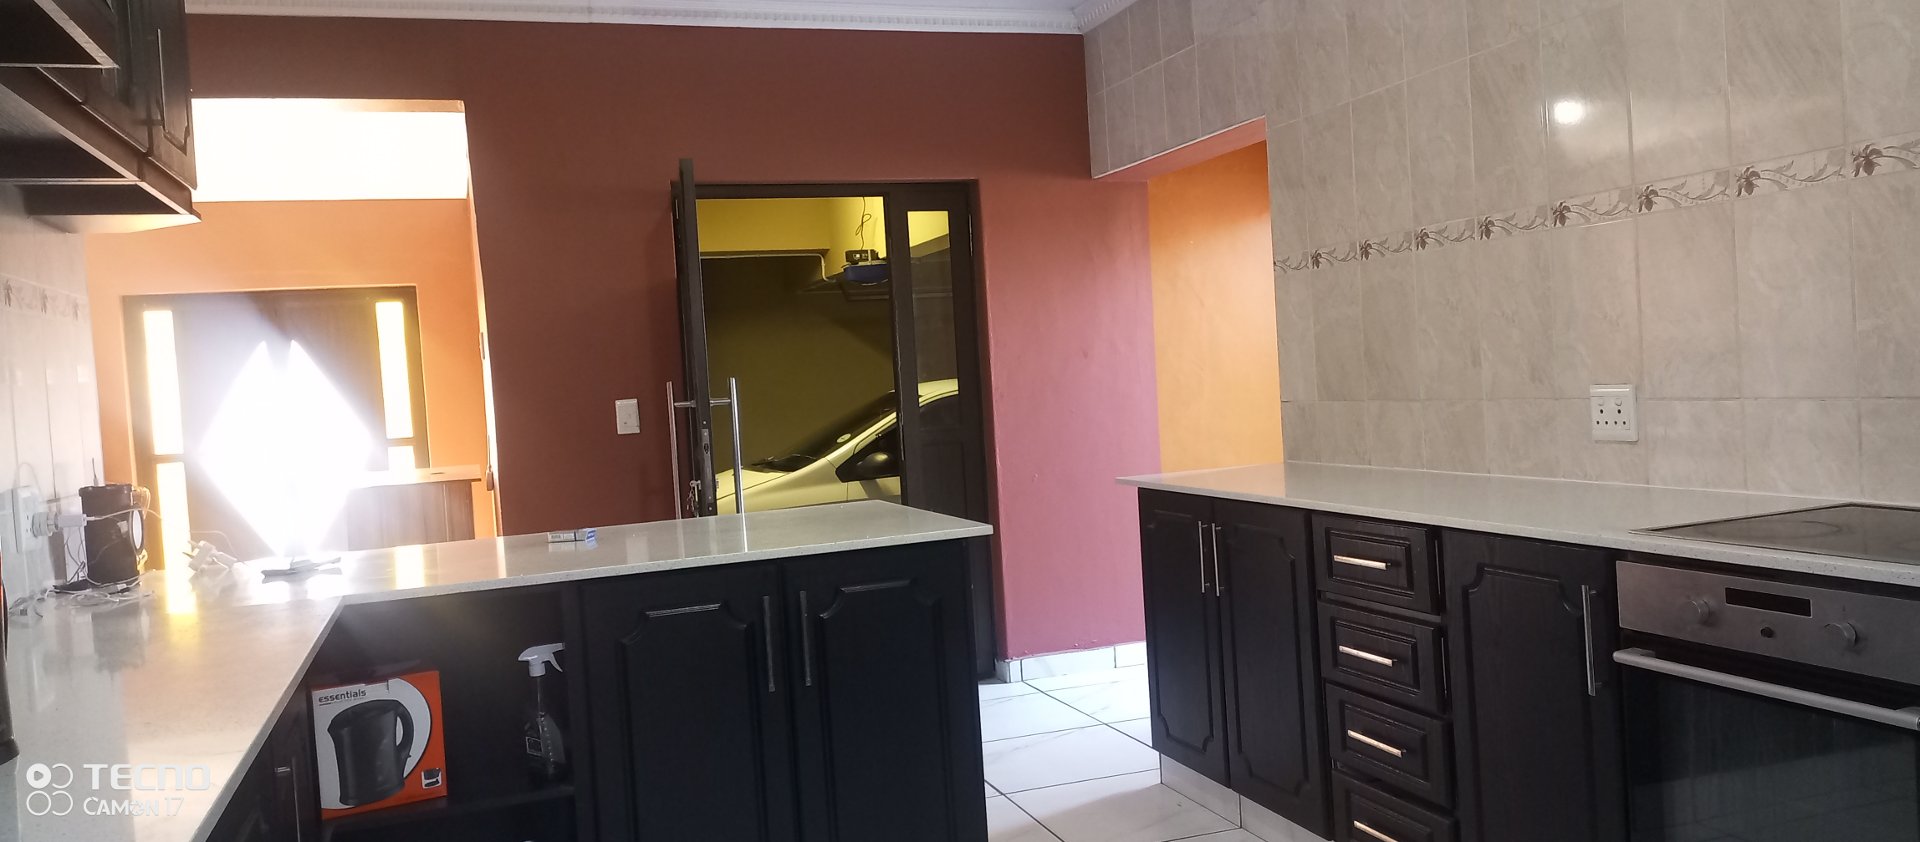 7 Bedroom Property for Sale in Electric City Western Cape